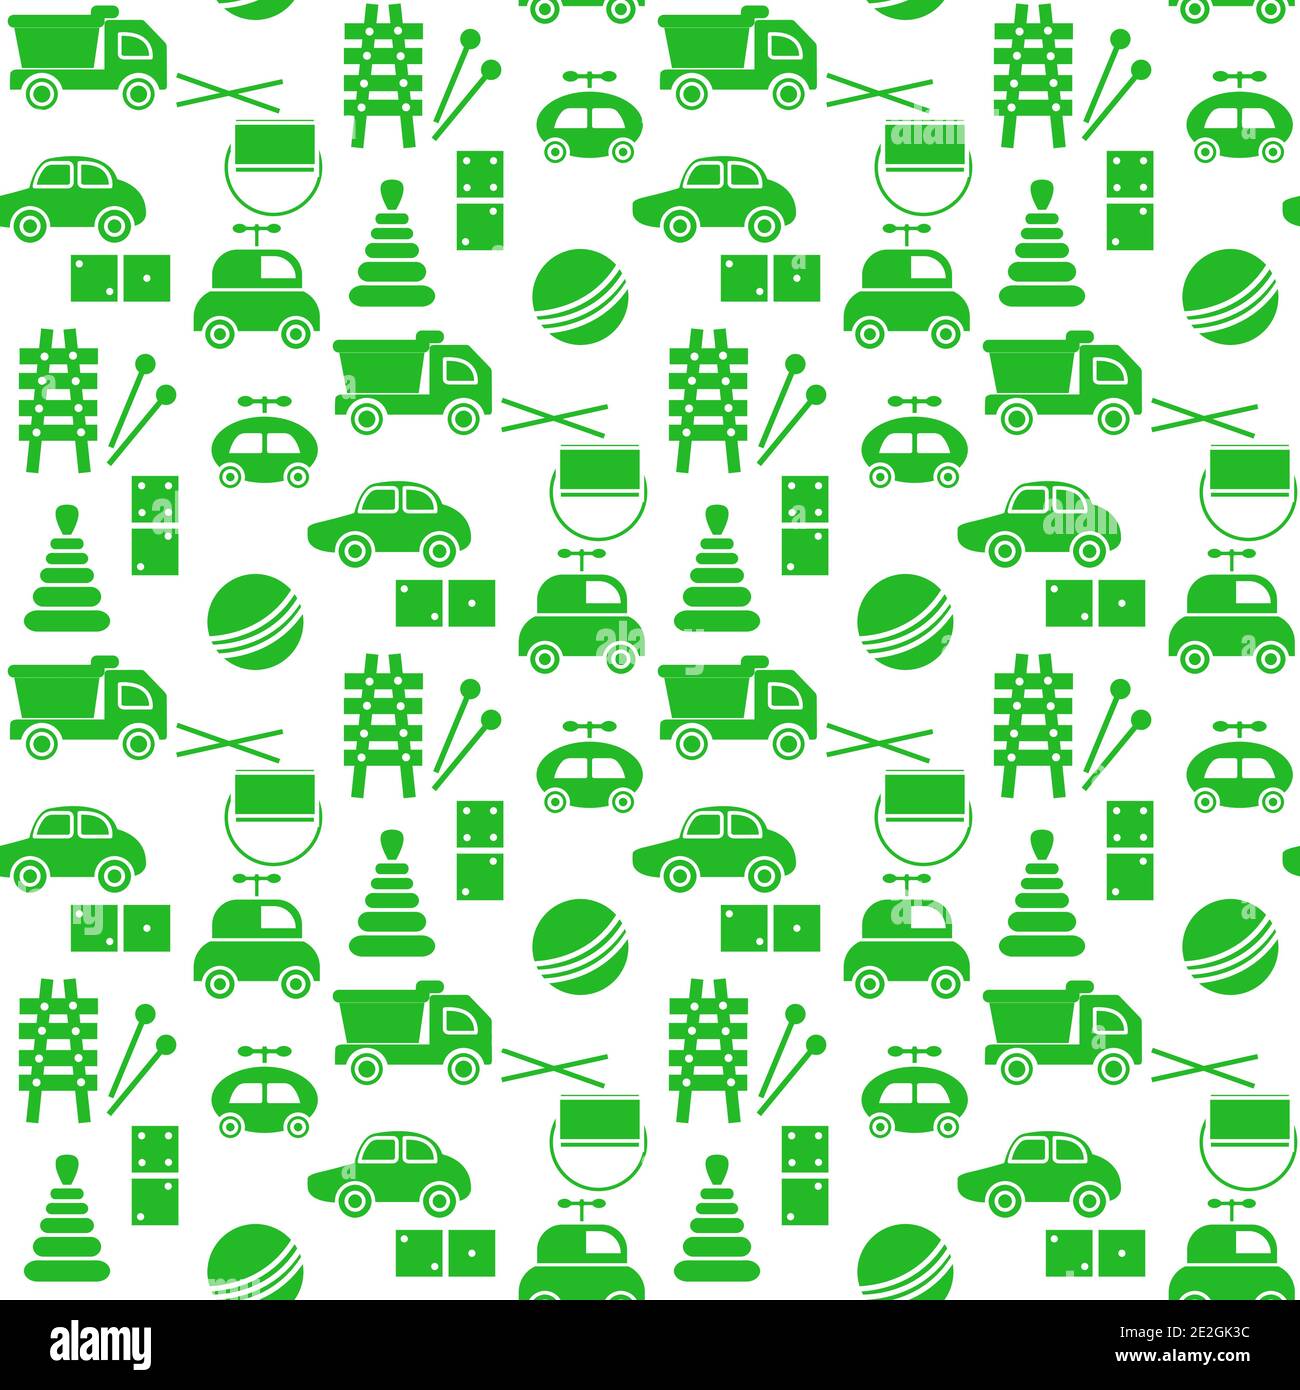 Vector seamless pattern Kid toys illustration Happy childhood Gaming items Cars pyramid, domino, xylophone drum ball Primary school, elementary grade, Stock Vector